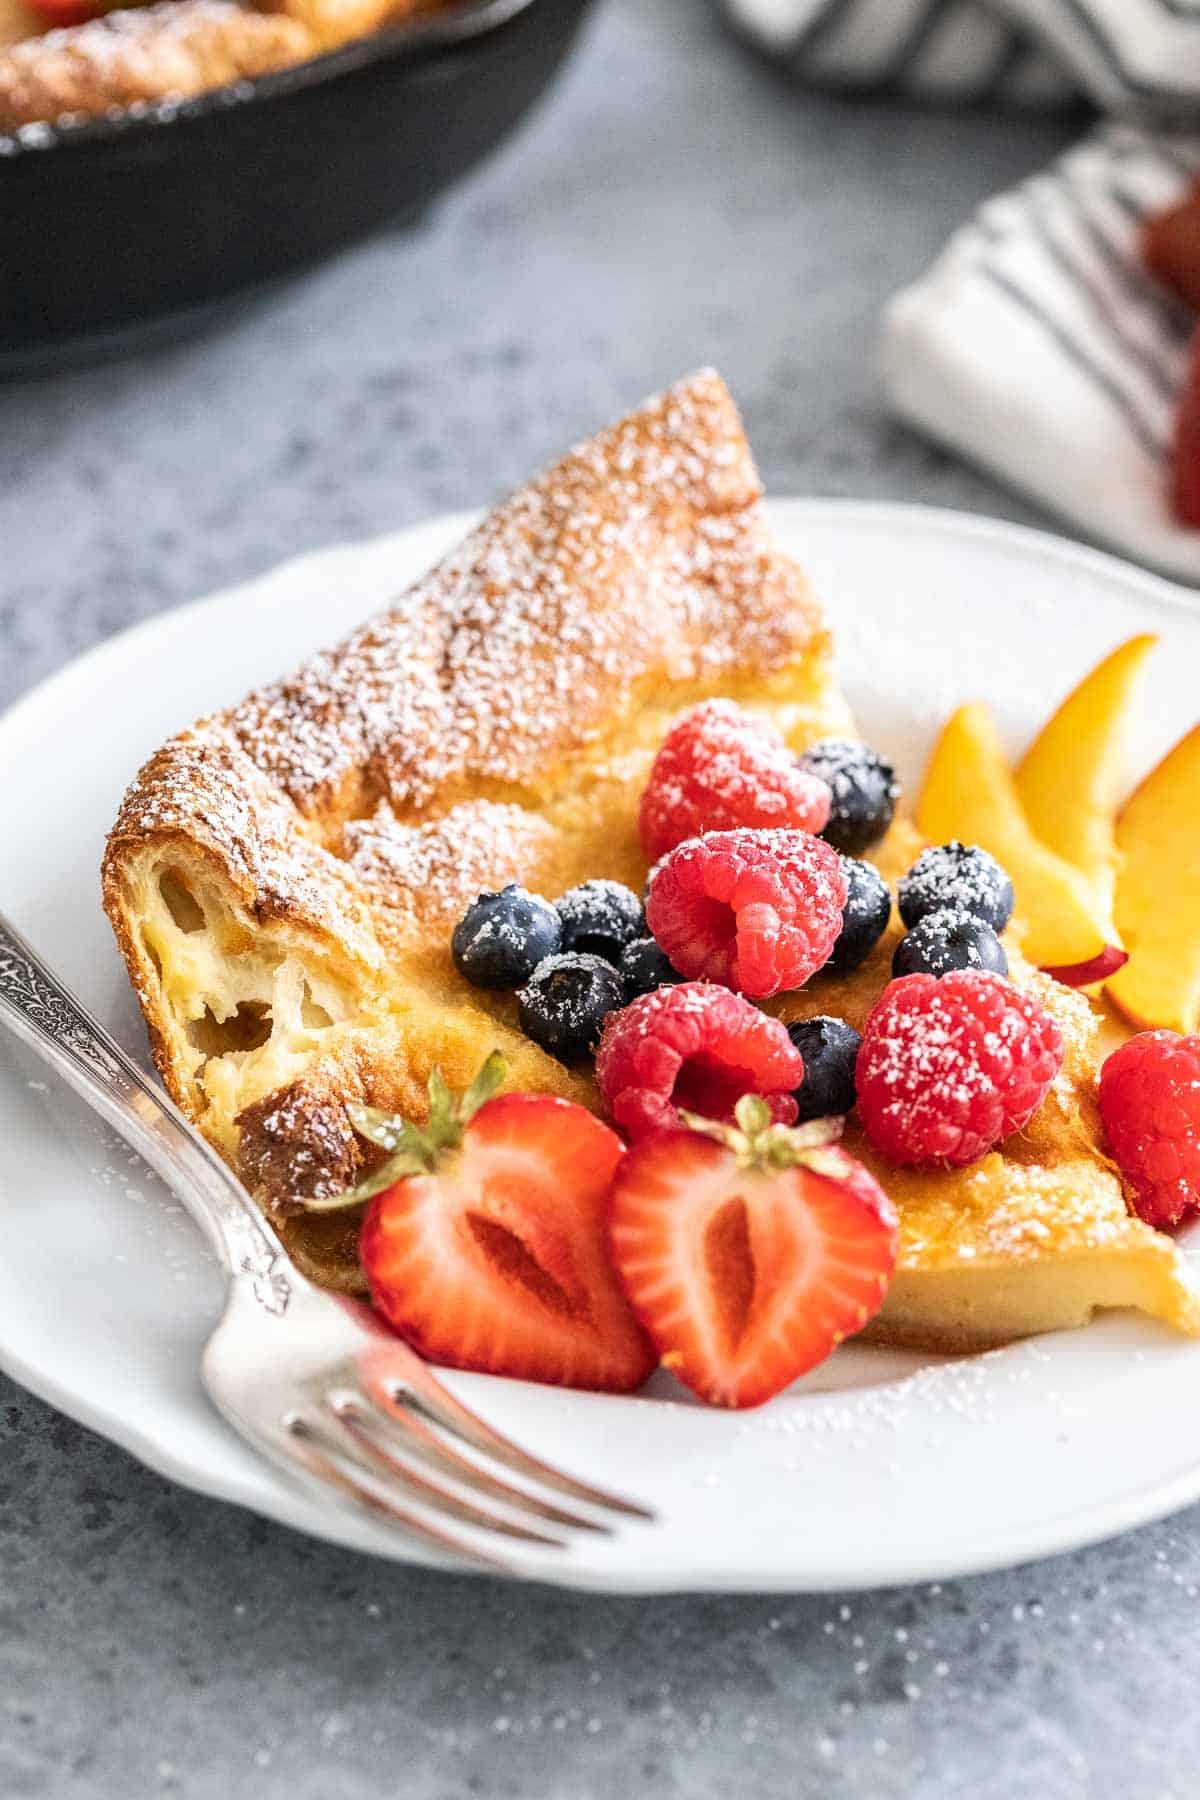 A slice of Dutch Baby pancake on a white plate garnished with berries.